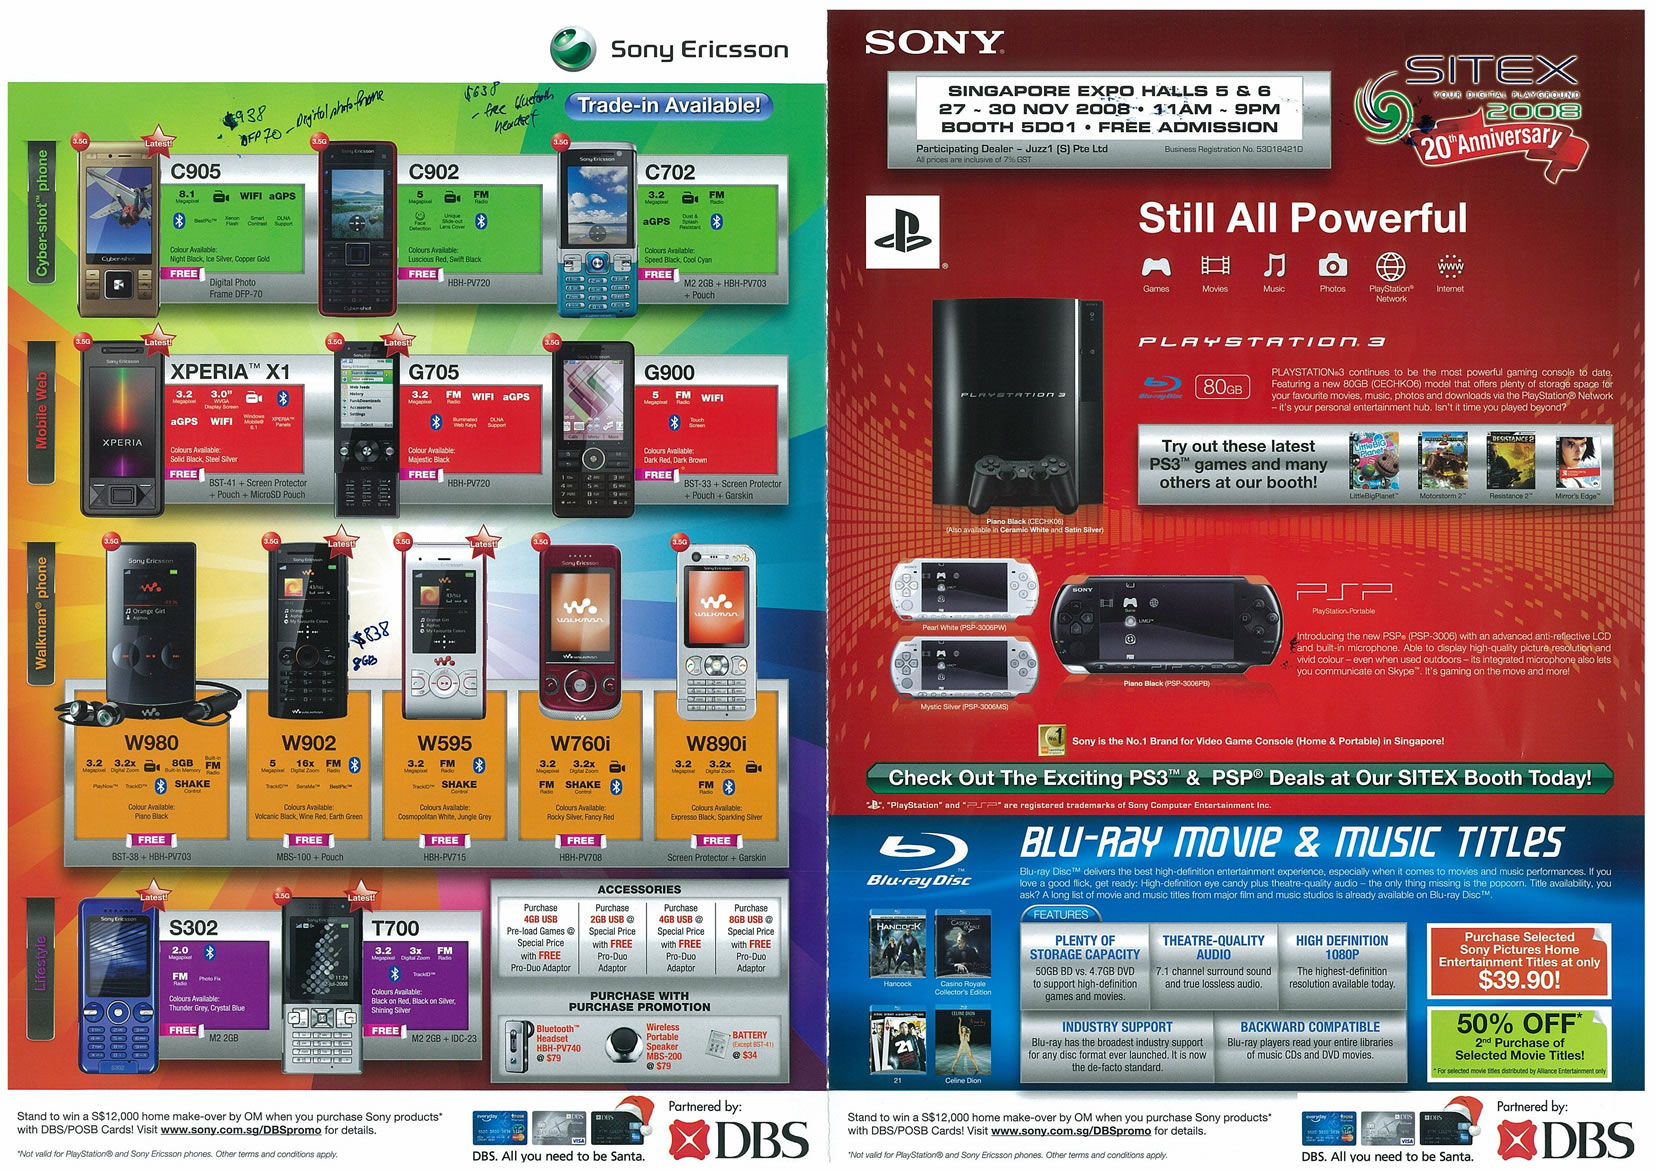 Sitex 2008 price list image brochure of Sony Page 1 - Vr-zone Tclong